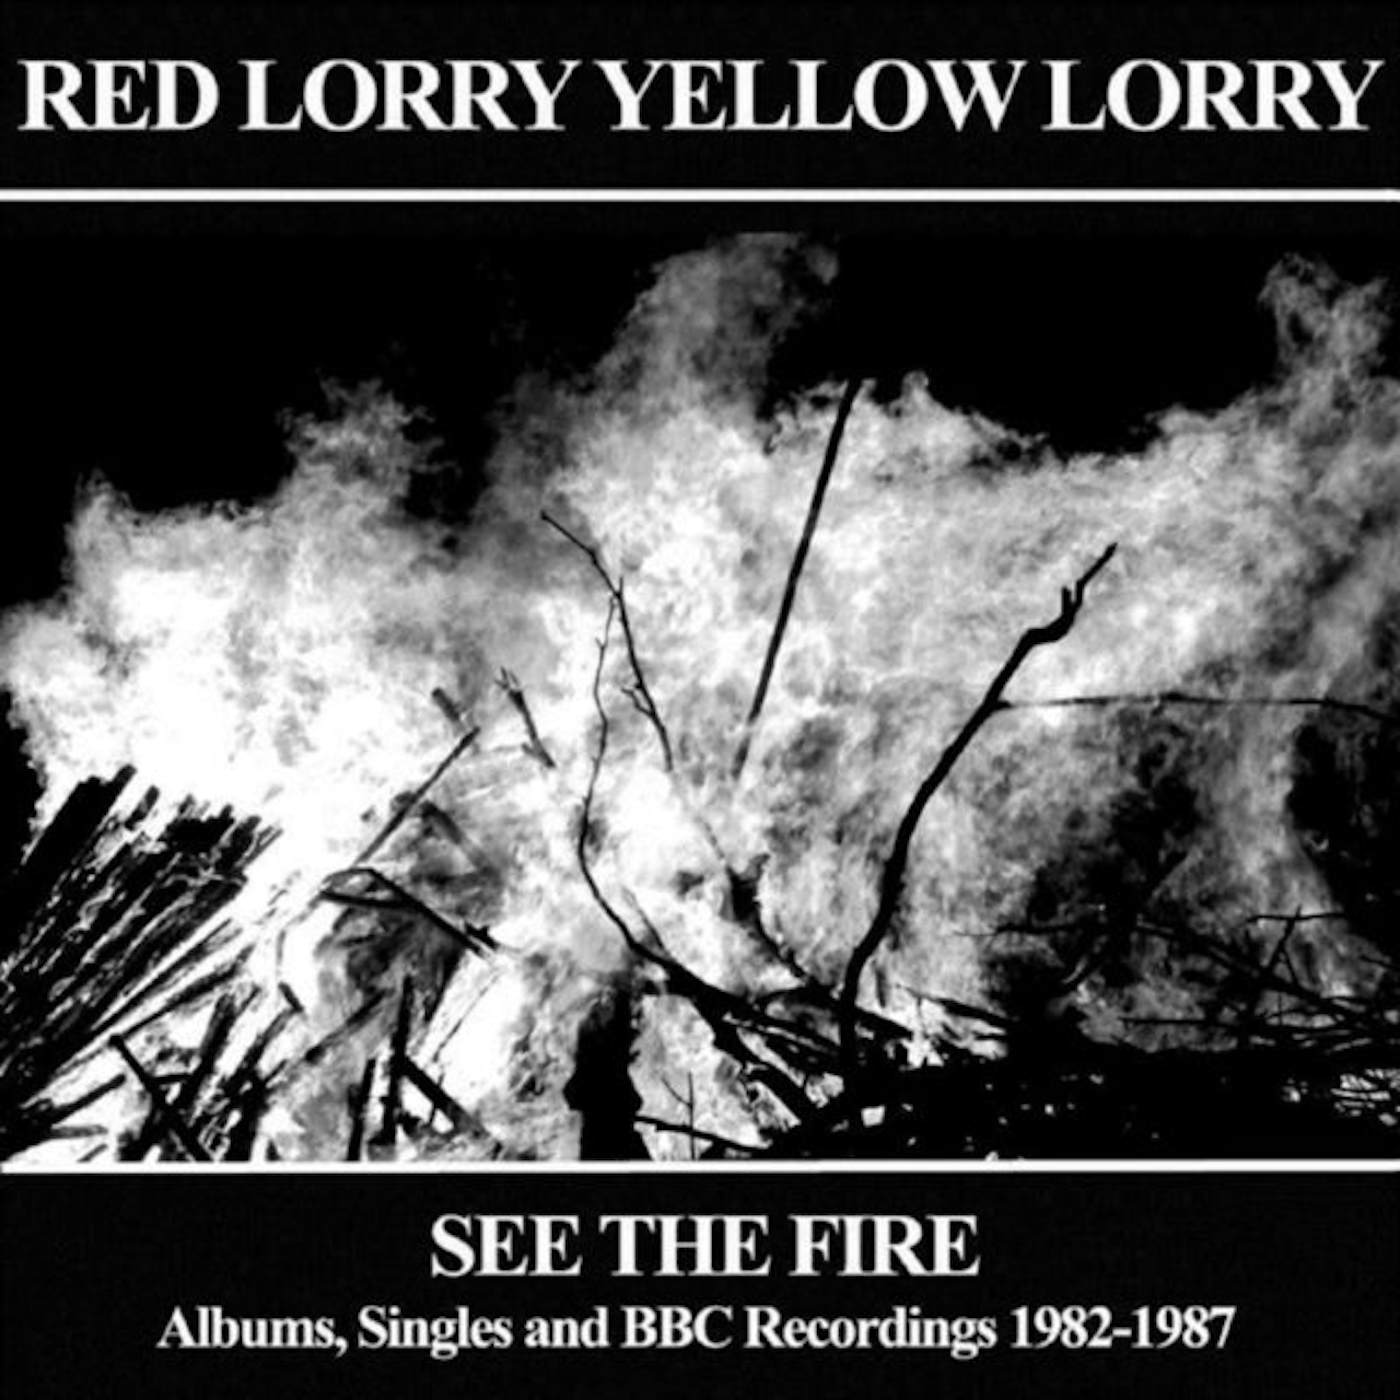 Red Lorry Yellow Lorry CD - See The Fire Albums. Singles And Bbc Recordings 19 82-19 87